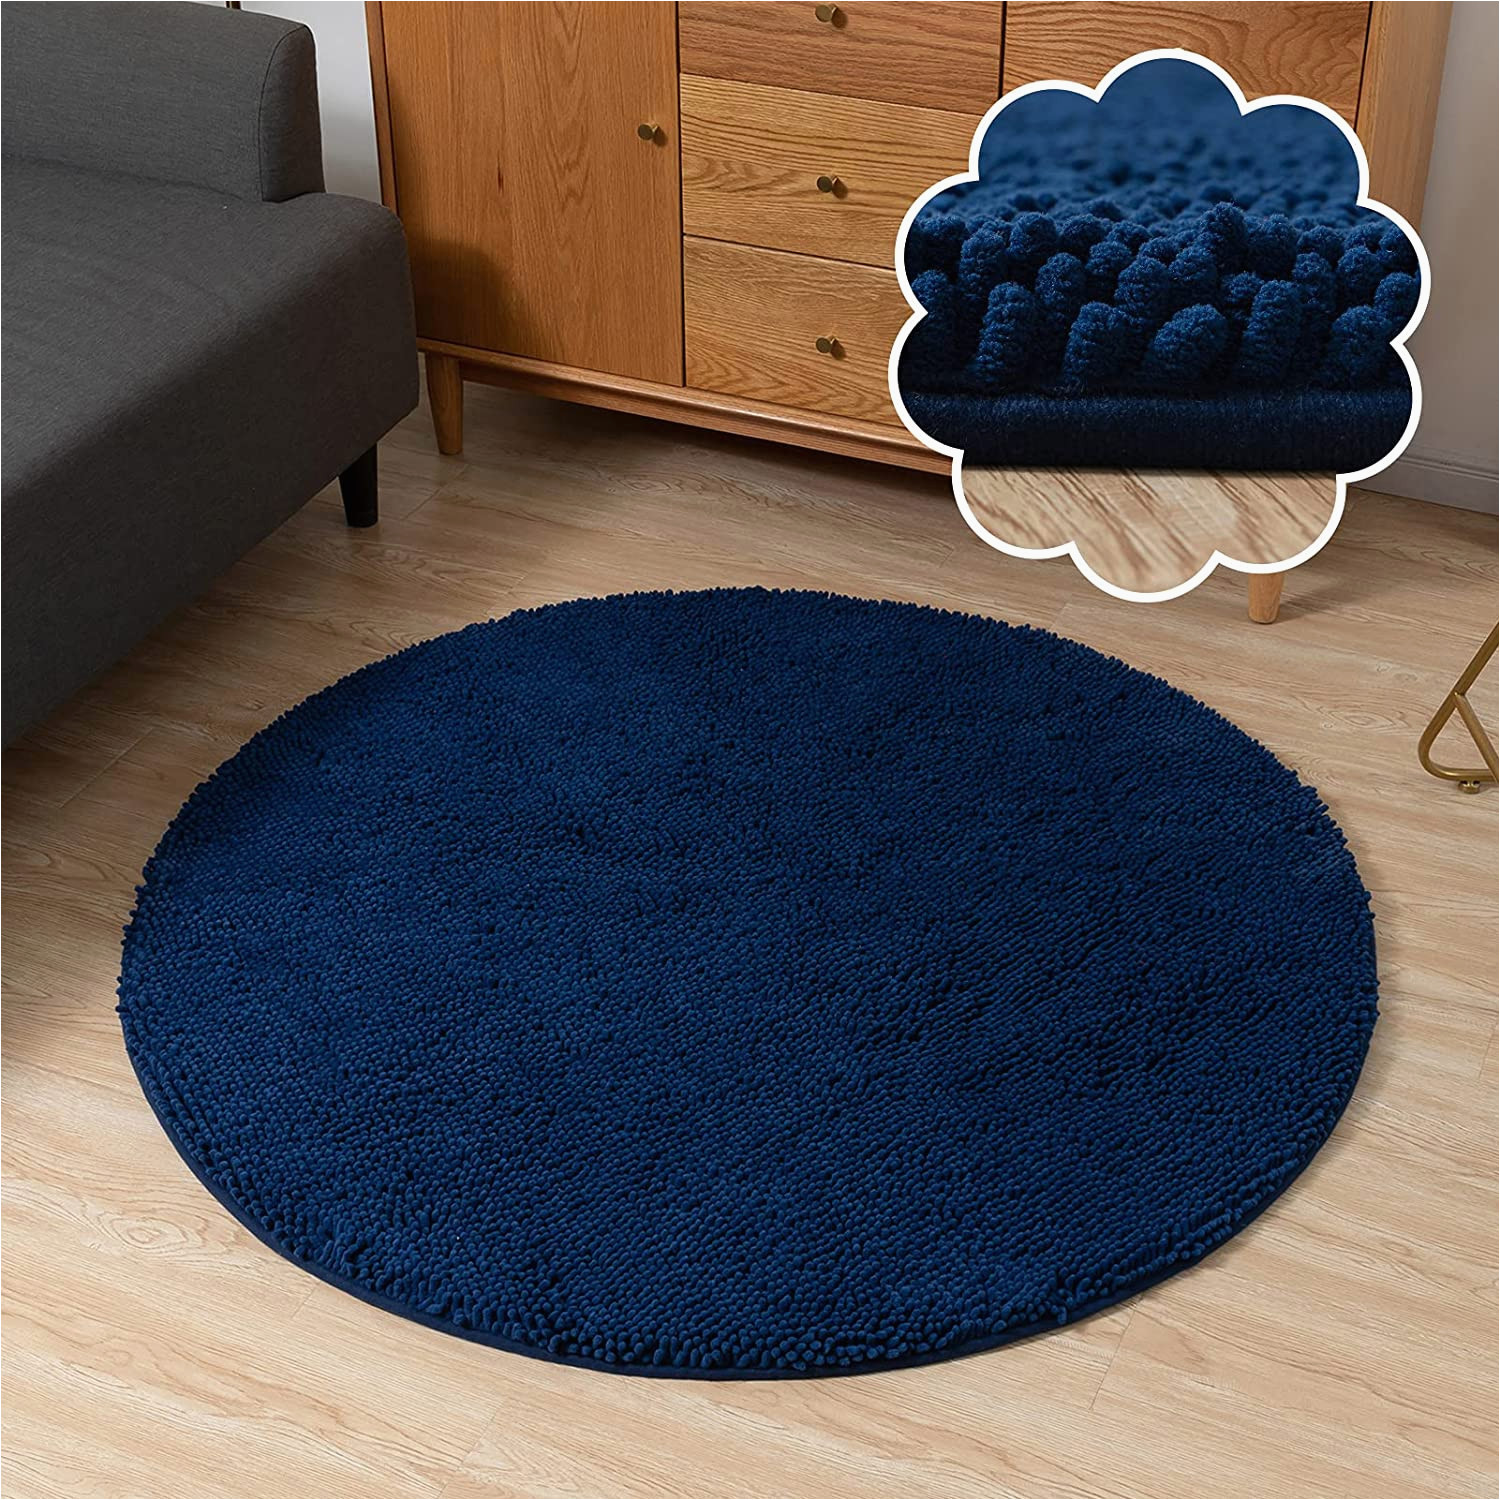 Small Round Blue Rug Buy Antjumper 3ft Navy Blue Round Rug, Circle Chenille Rug for …